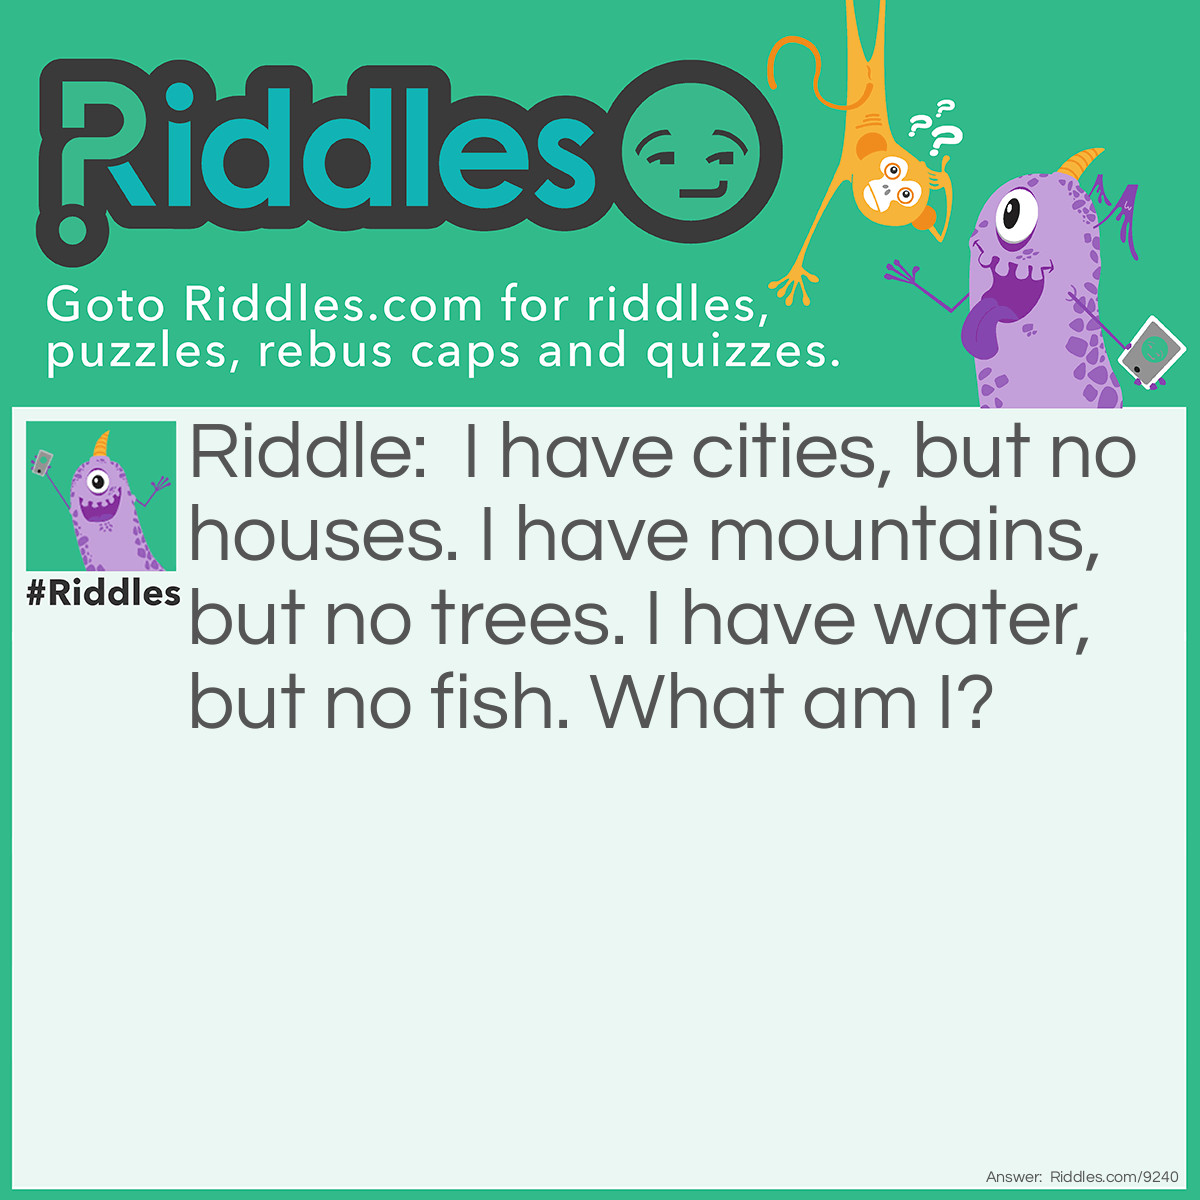 Riddle: I have cities, but no houses. I have mountains, but no trees. I have water, but no fish. What am I? Answer: A map.